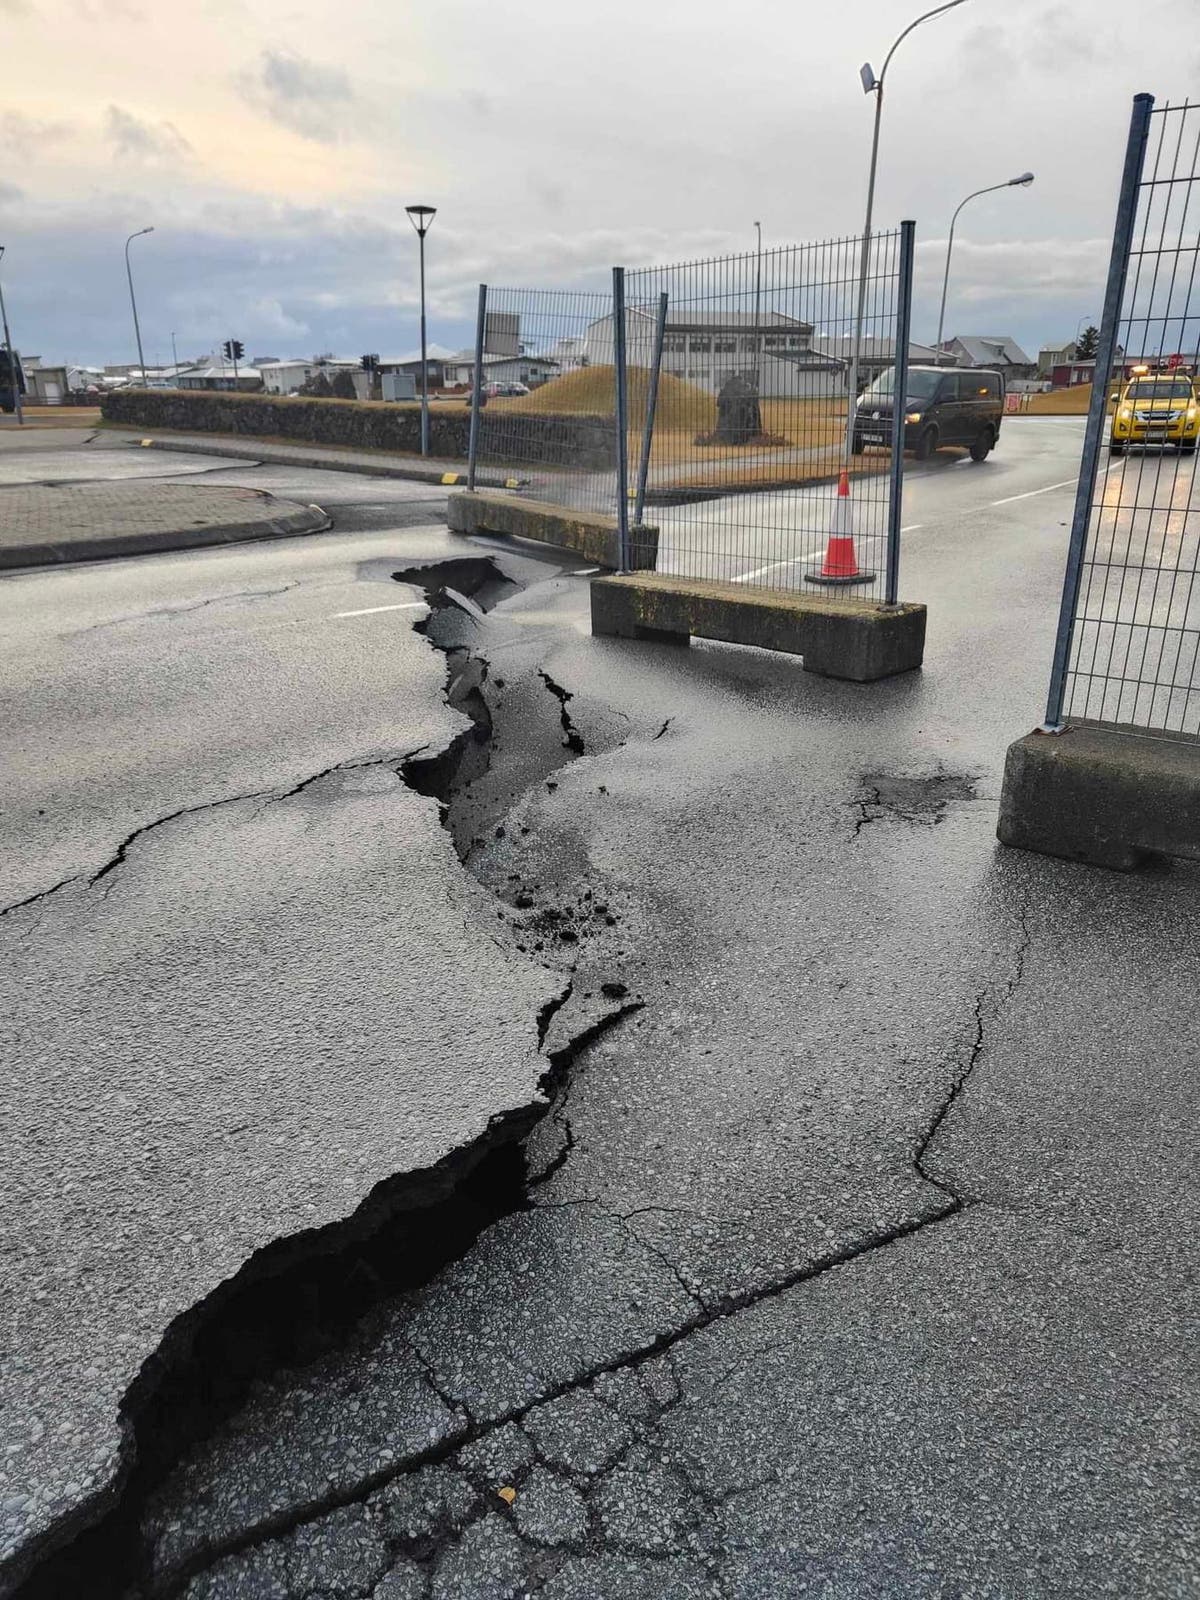 Iceland earthquake: Town of Grindavik ‘could be obliterated’ if volcanic eruption strikes